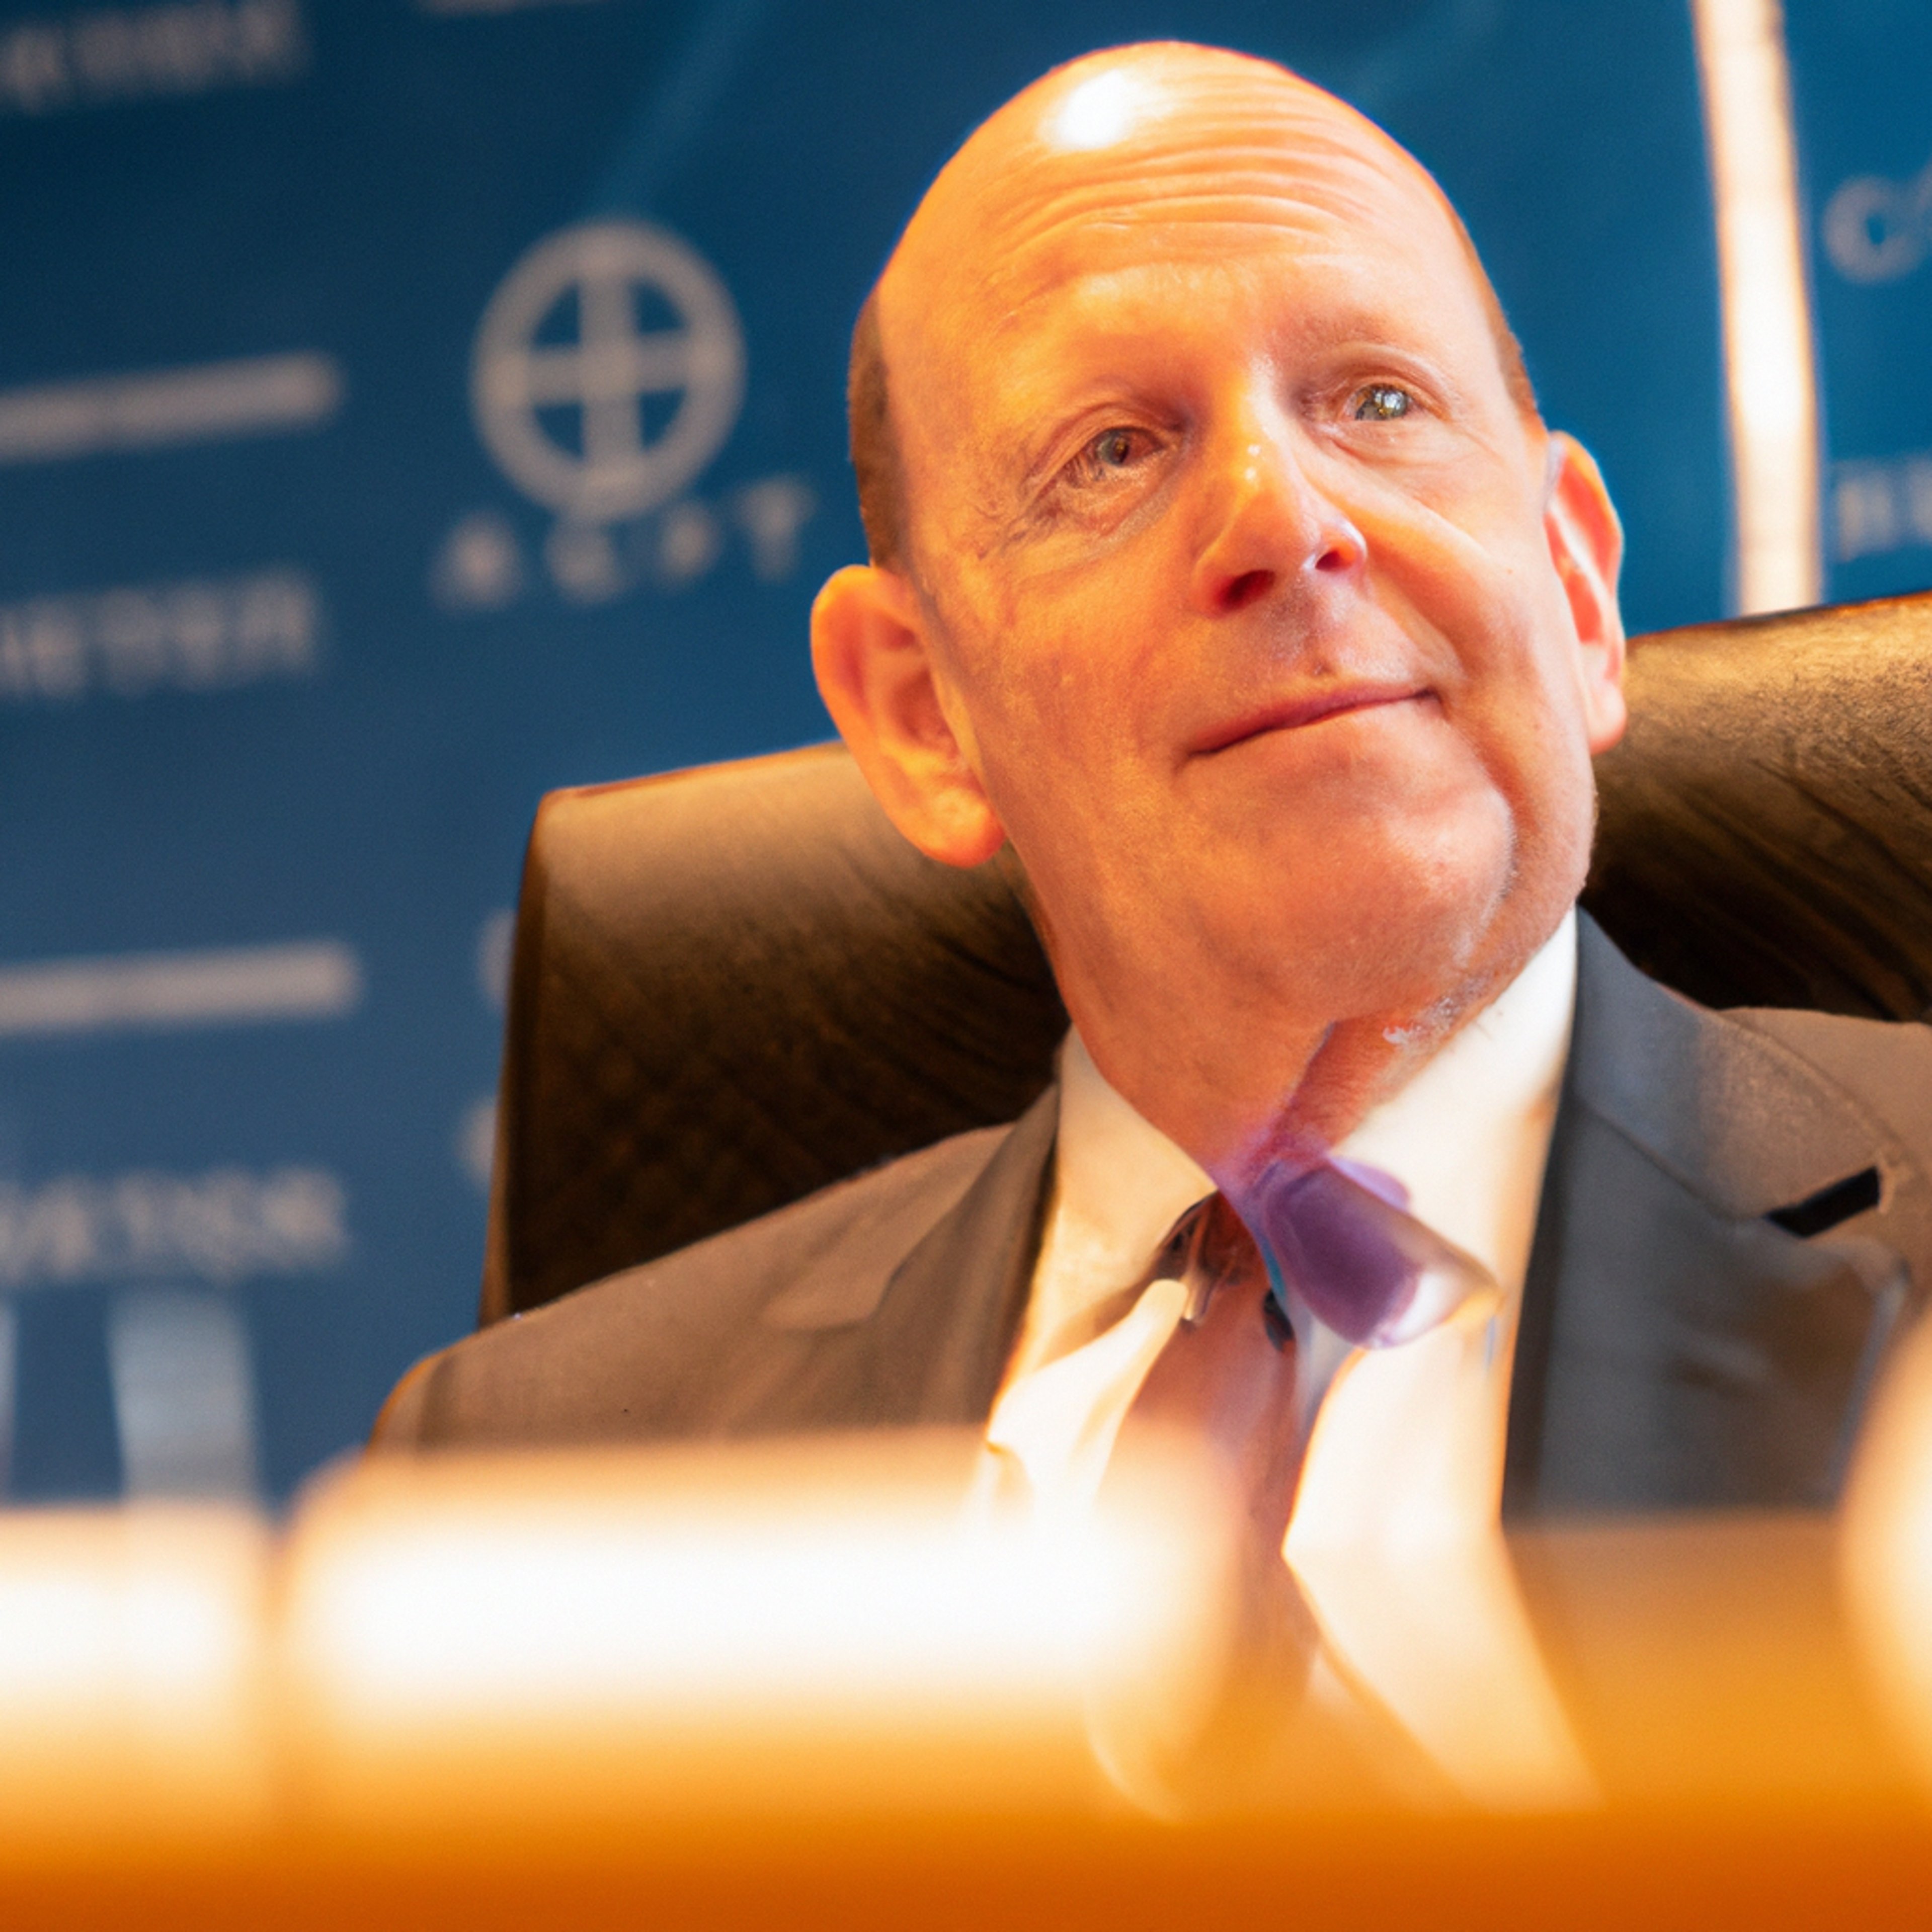 SEC Chair Gensler Urges Greater Resources to Combat Crypto Non-Compliance